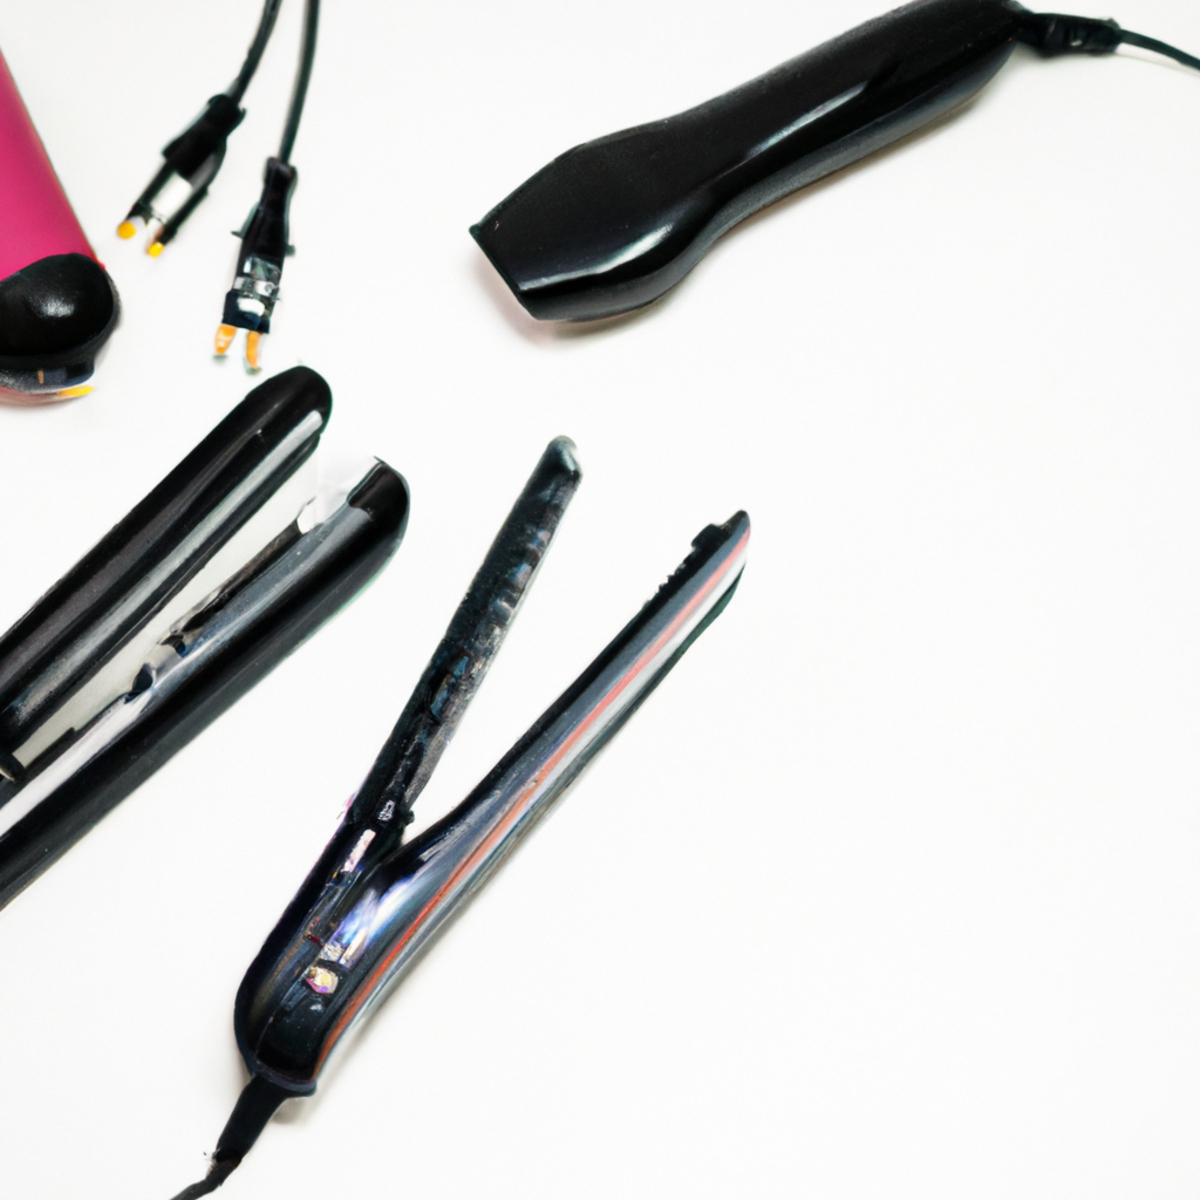 Sleek and modern hair styling tools arranged neatly on white background, conveying transformative power for hair care.